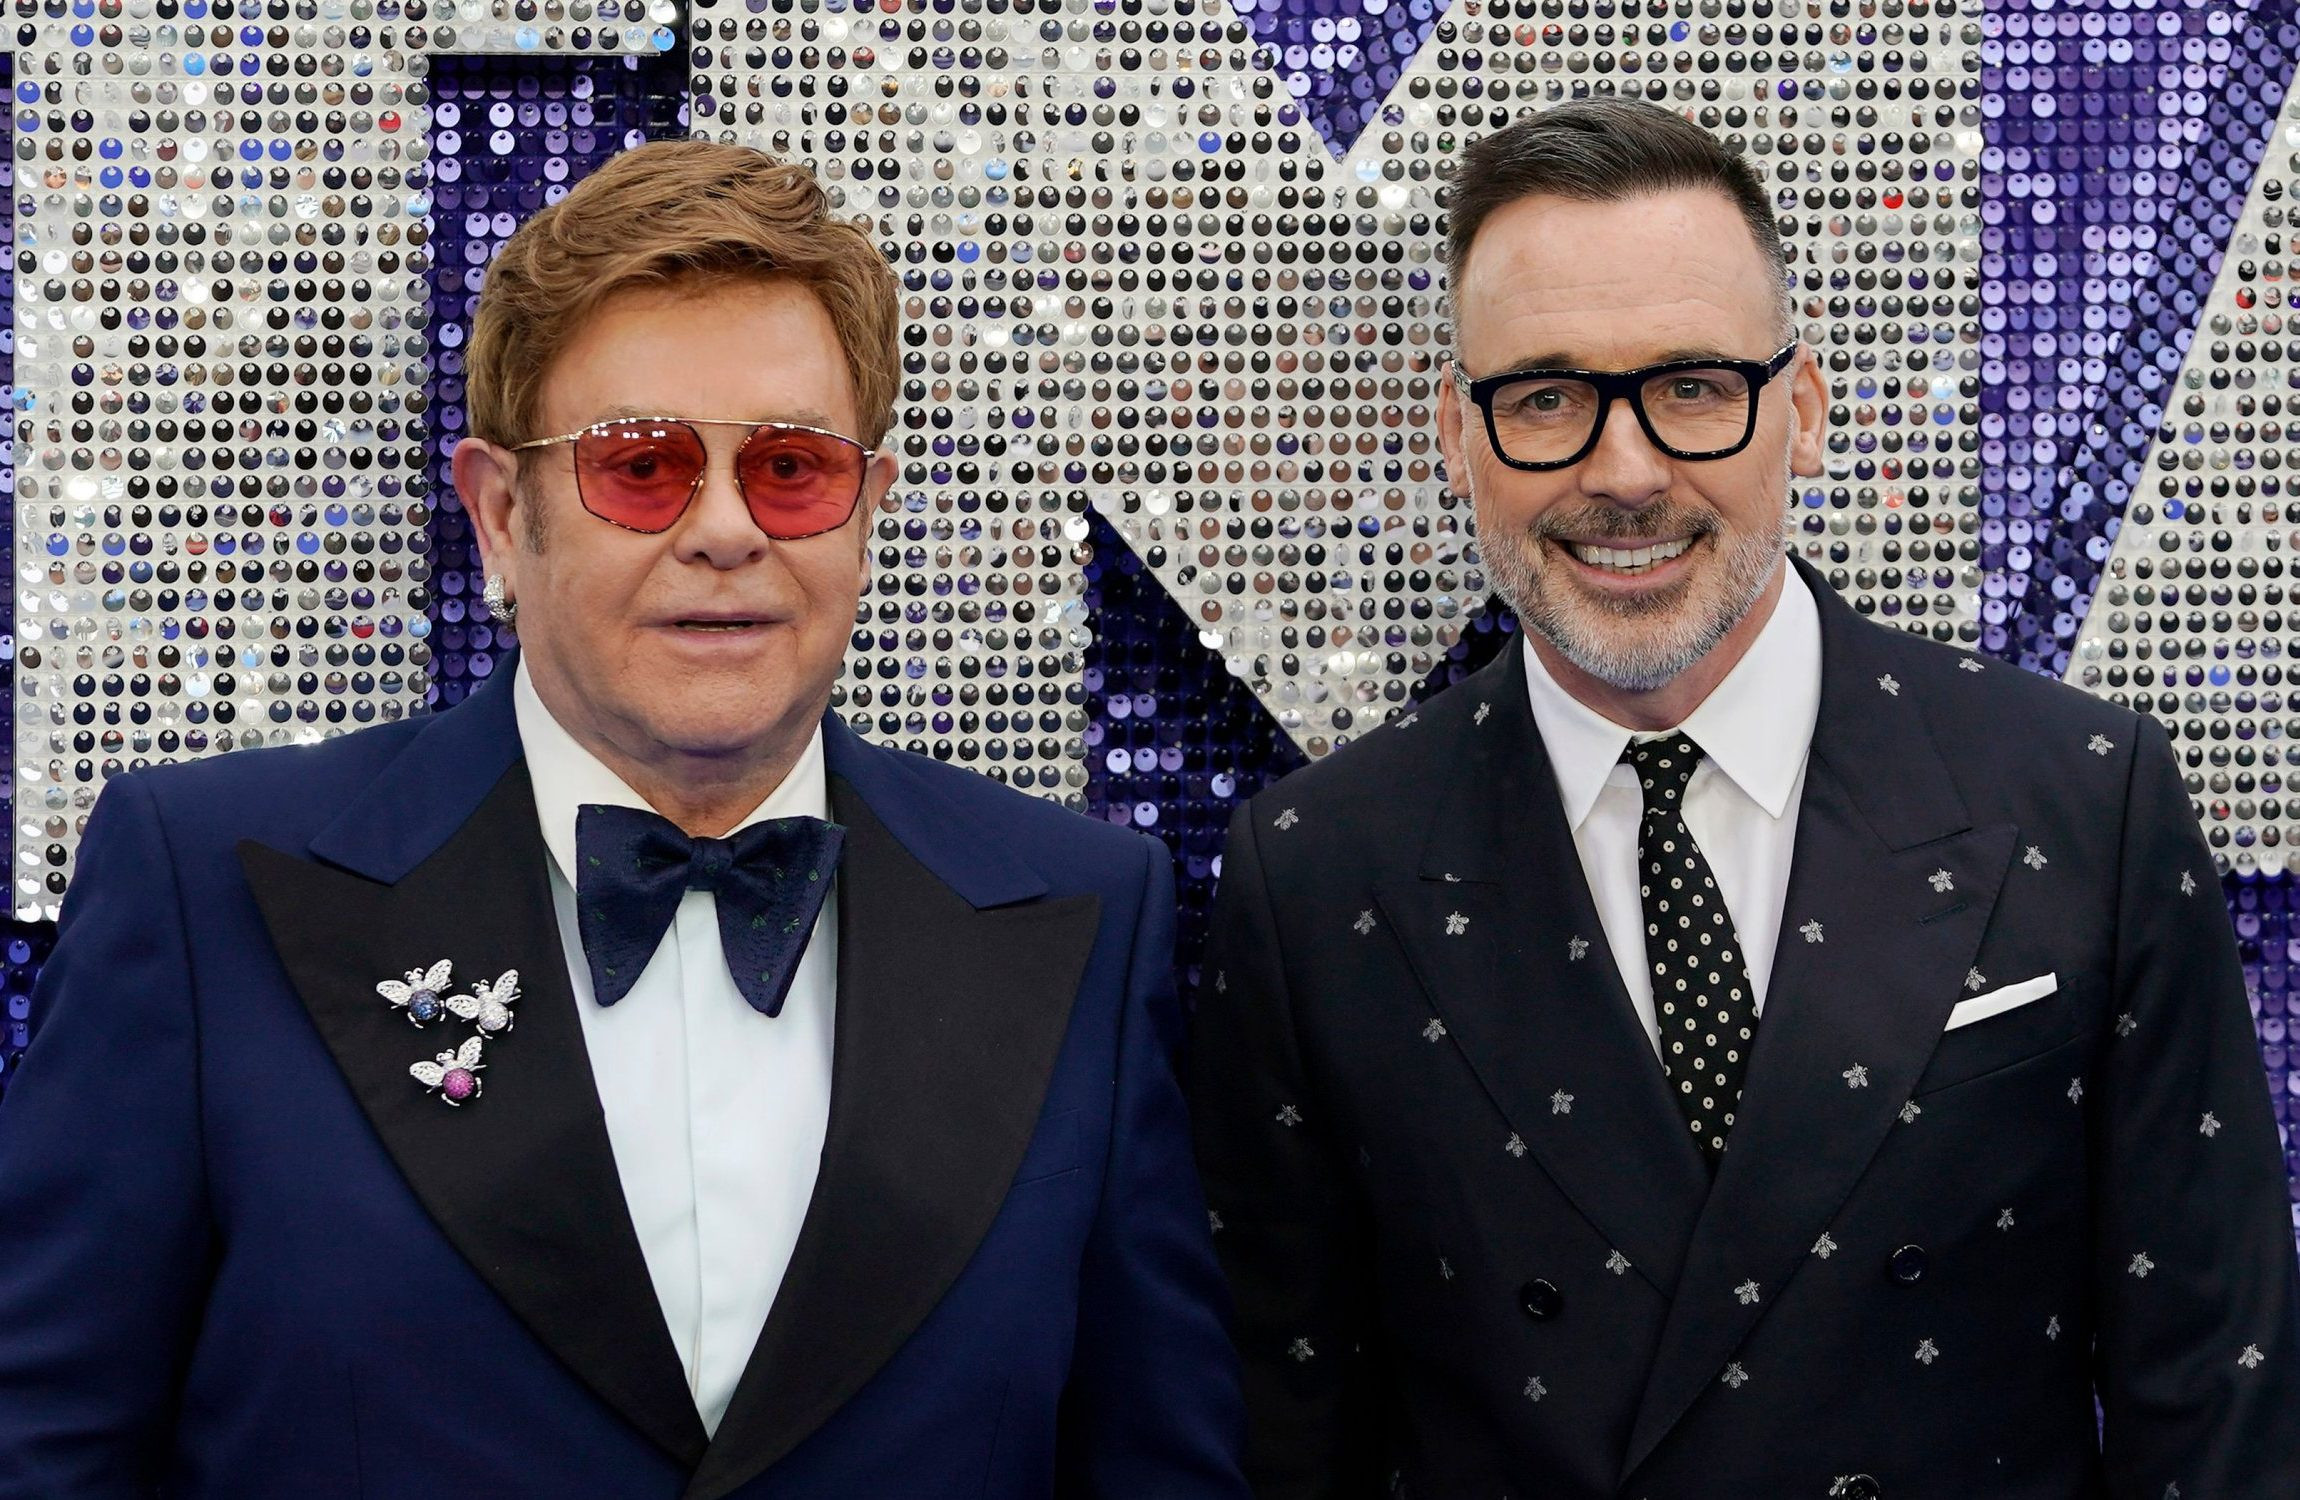 Sir Elton John’s husband David Furnish reveals relief after singer gets Covid-19 vaccine: ‘It’s a big load off my mind’